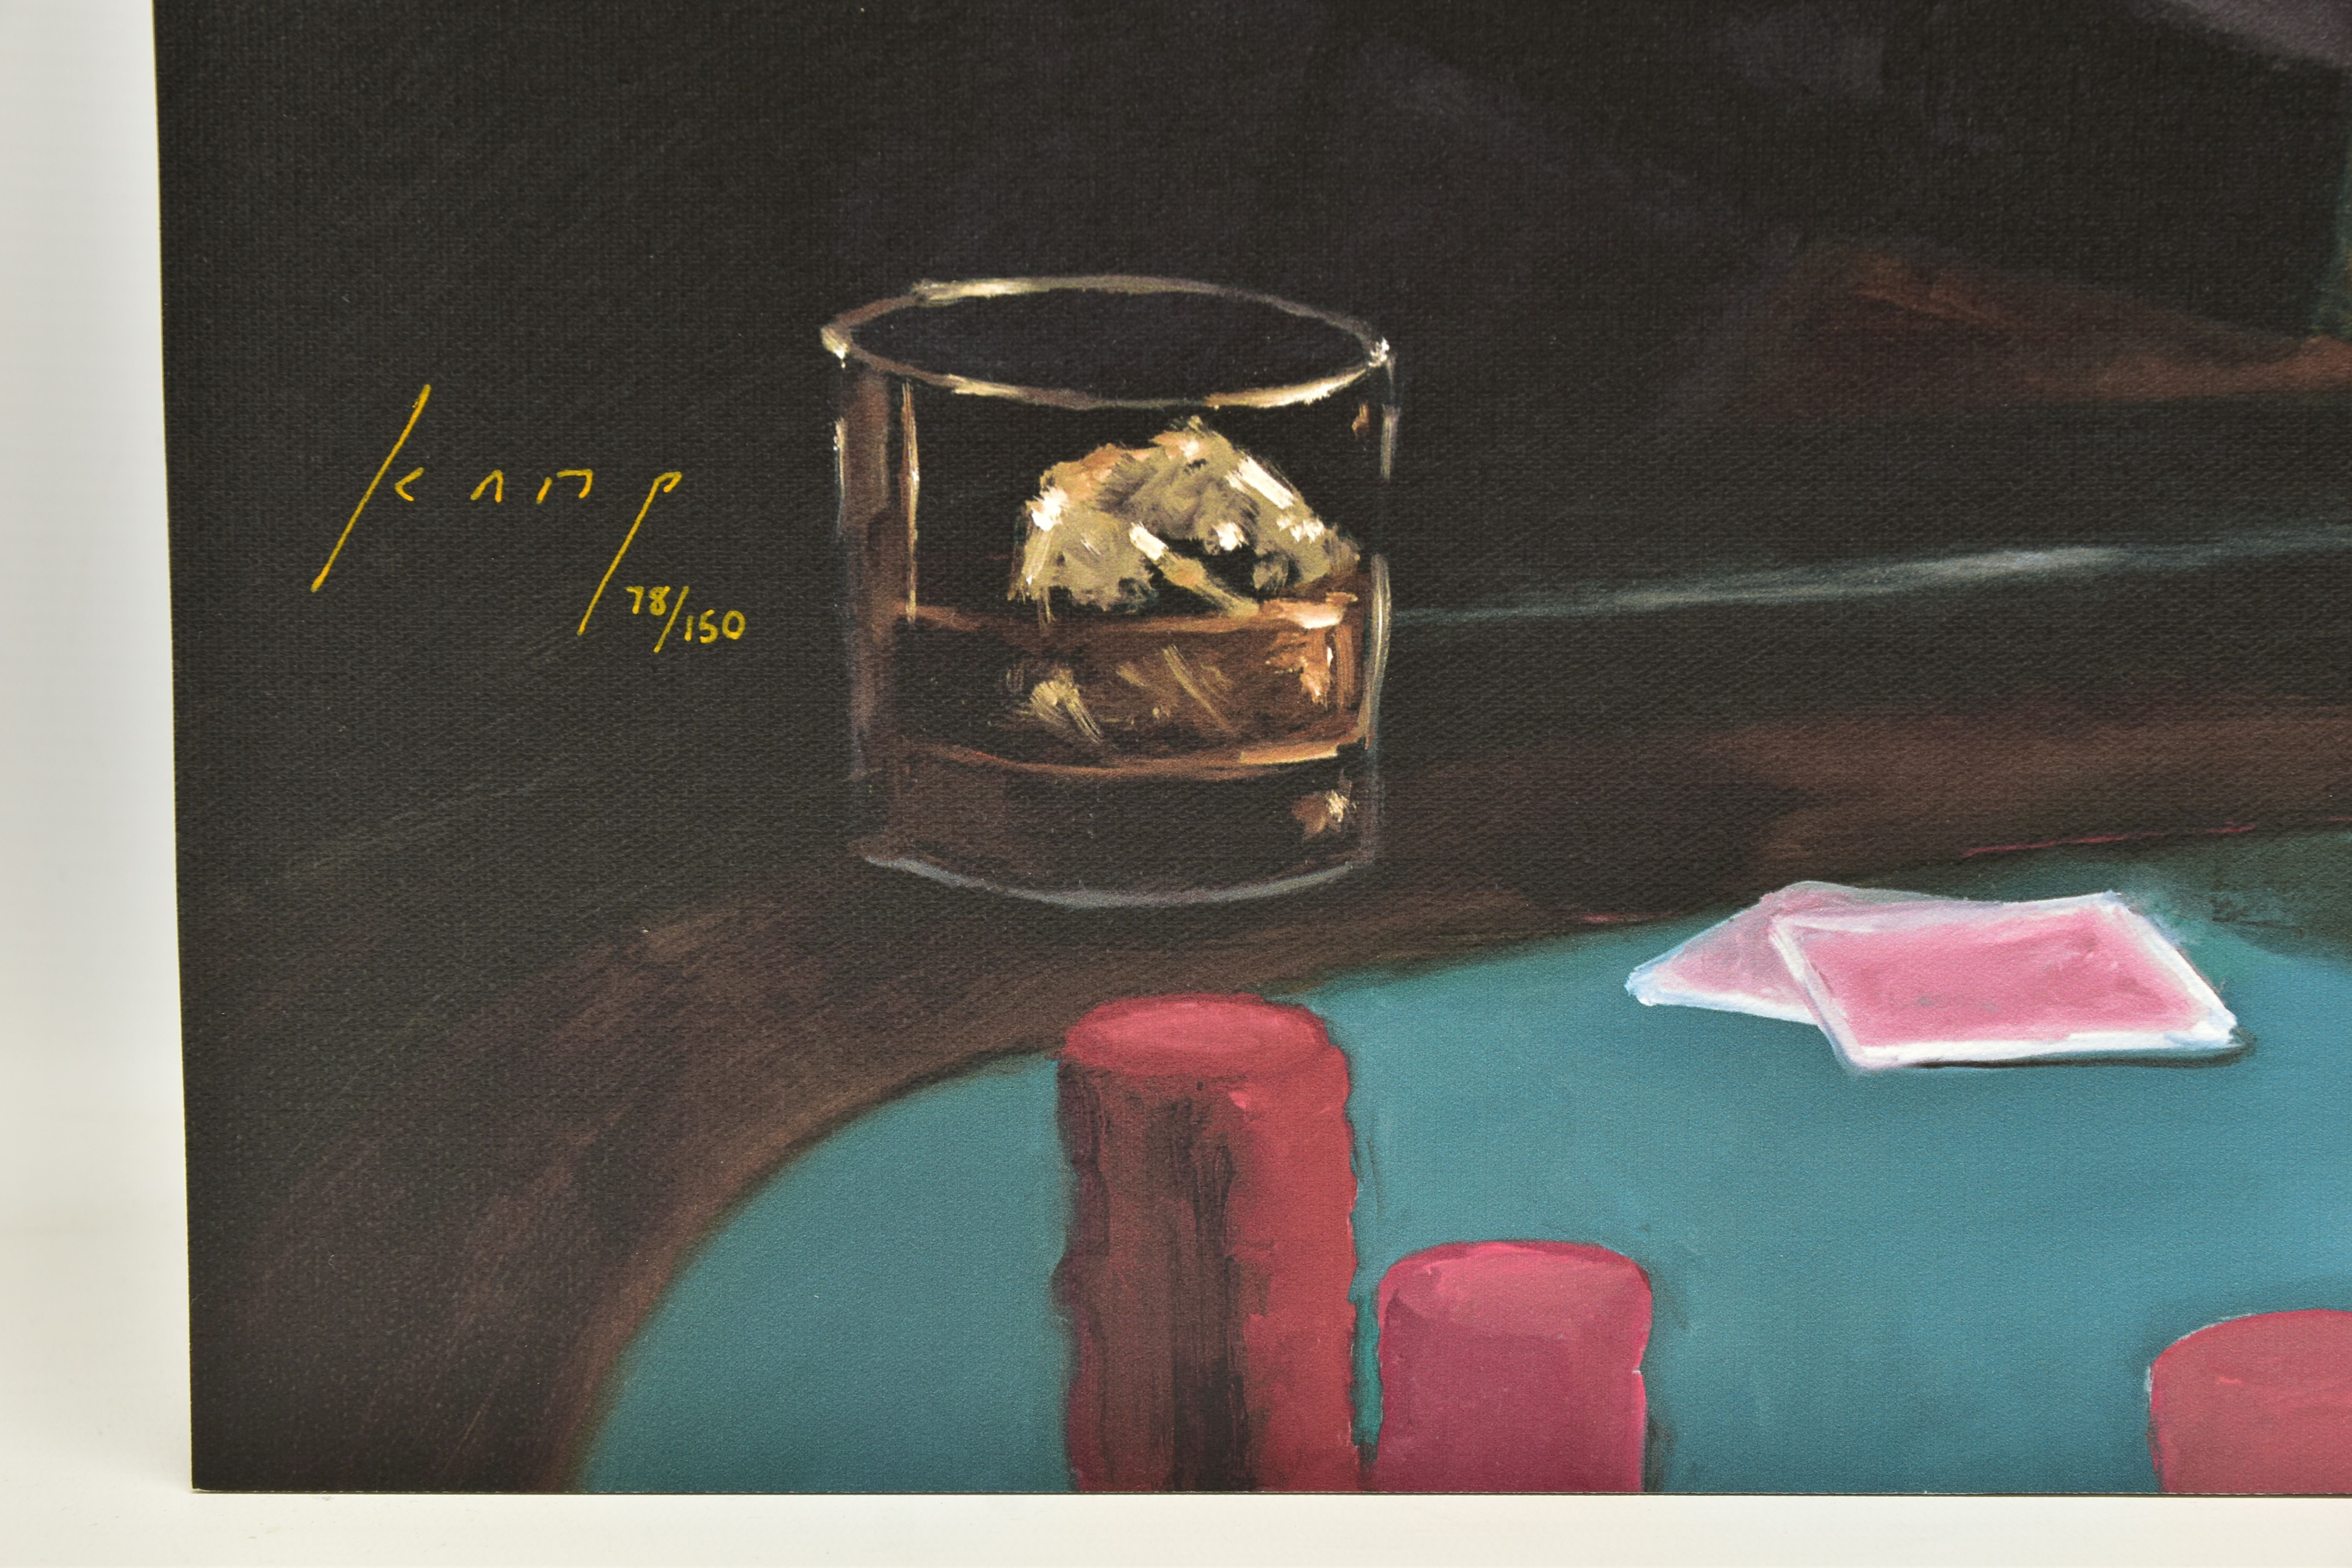 VINCENT KAMP (BRITISH CONTEMPORARY) 'ANTOINE'S LAST MOVE', a signed limited edition print - Image 2 of 5